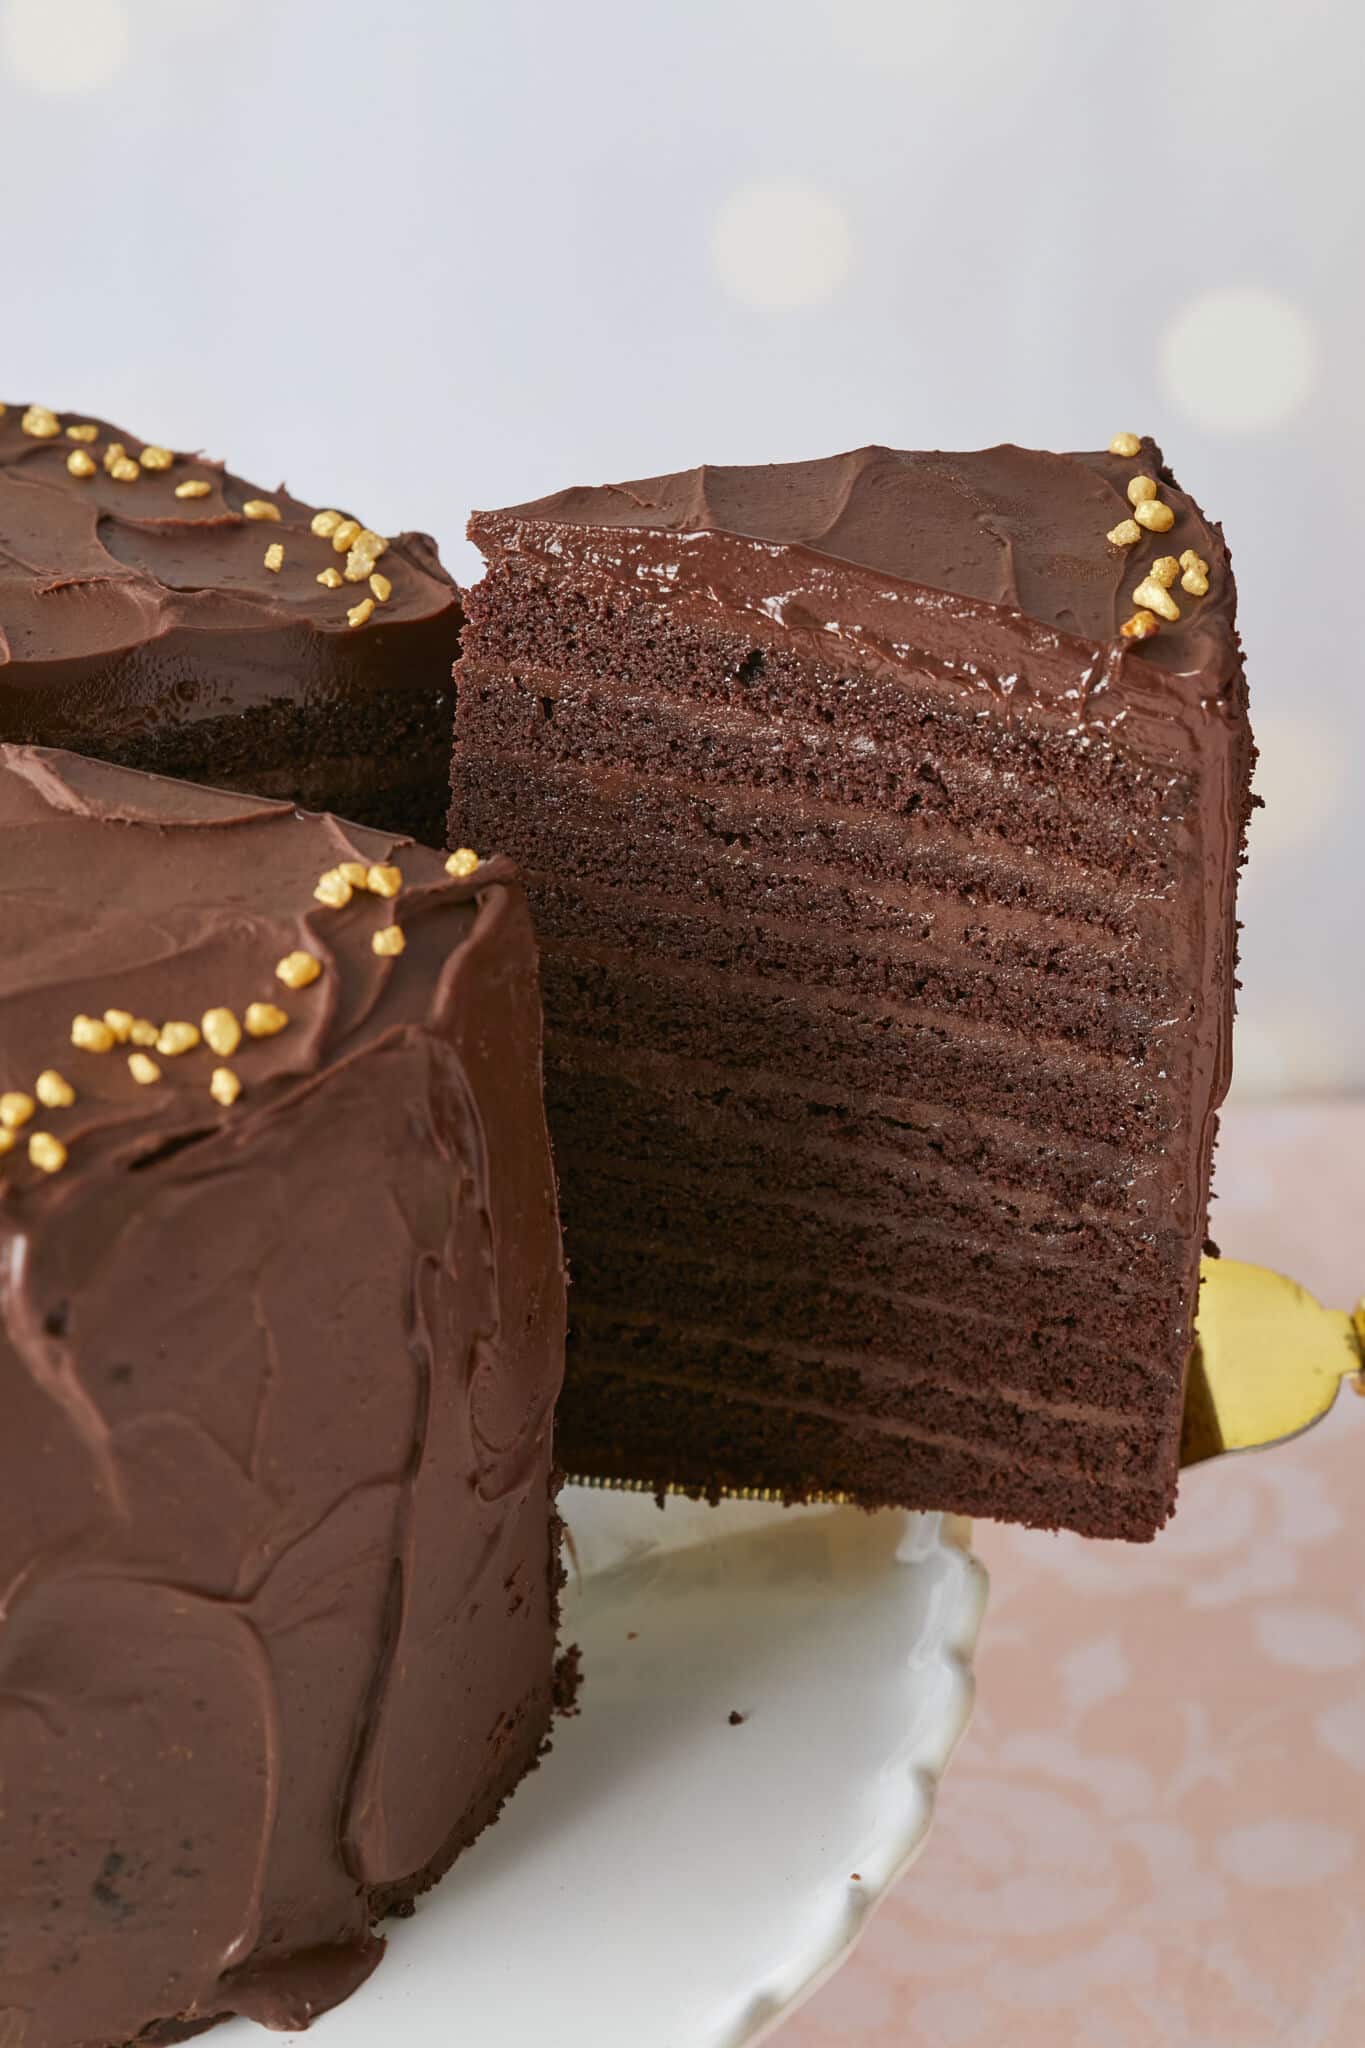 A generous slice of the 24-Layer Chocolate Cake is being lifted from the platter. A close-up shot at the slice shows its moist and soft crumb and silky smooth ganache on the outside and decadent chocolate pastry cream between the layers. 